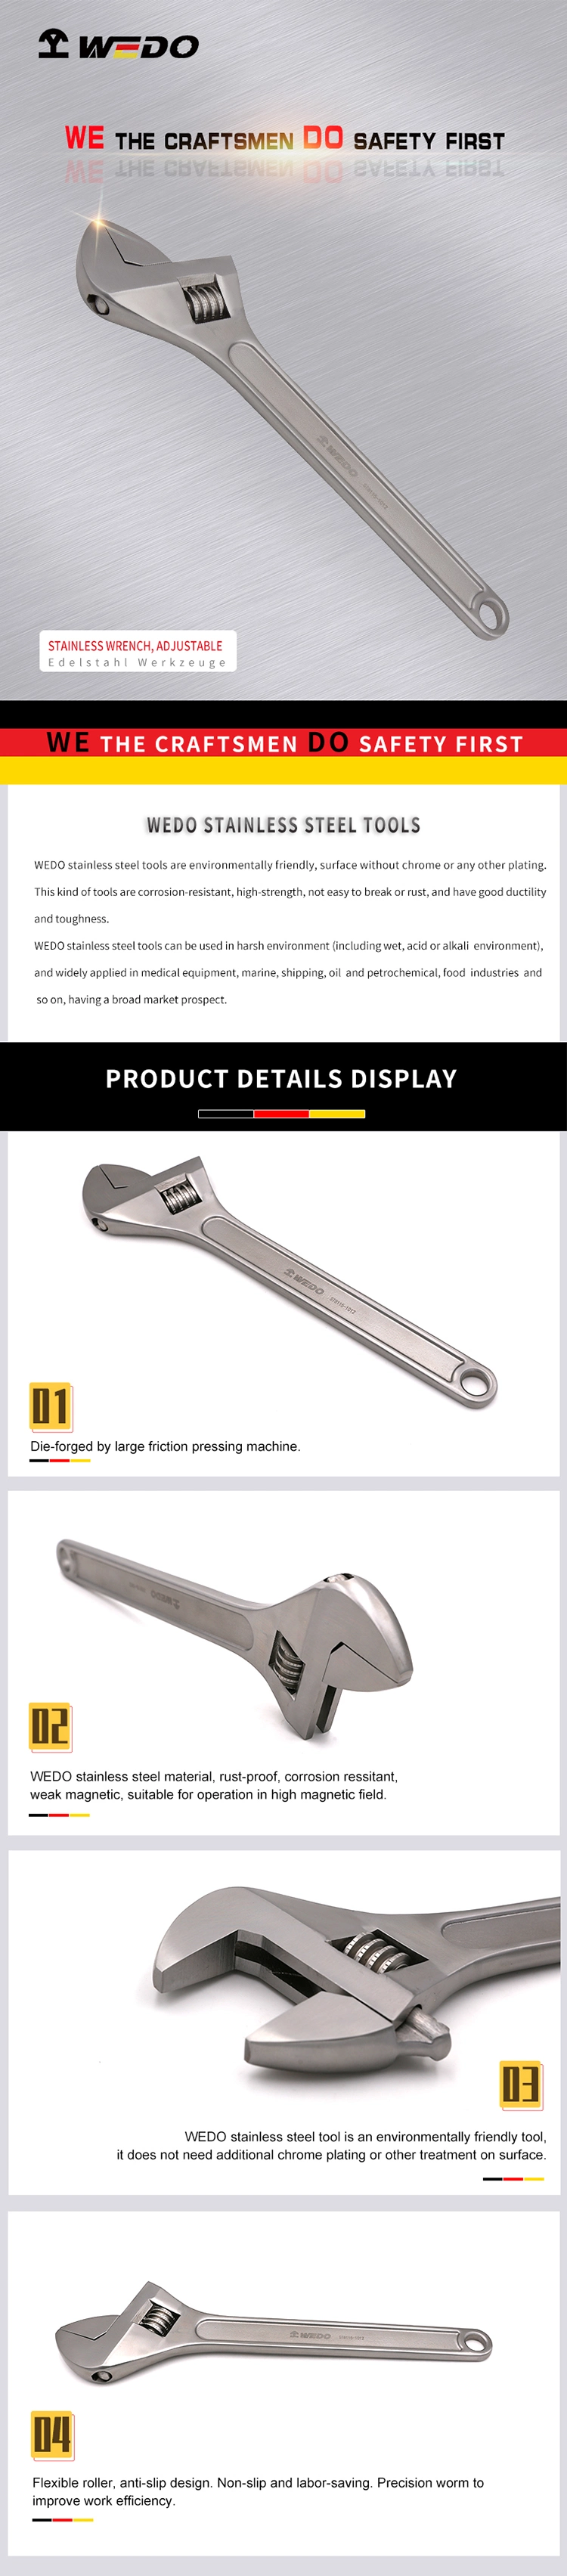 Wedo Stainless Steel Adjustable Wrench 304/316/420 Material Available